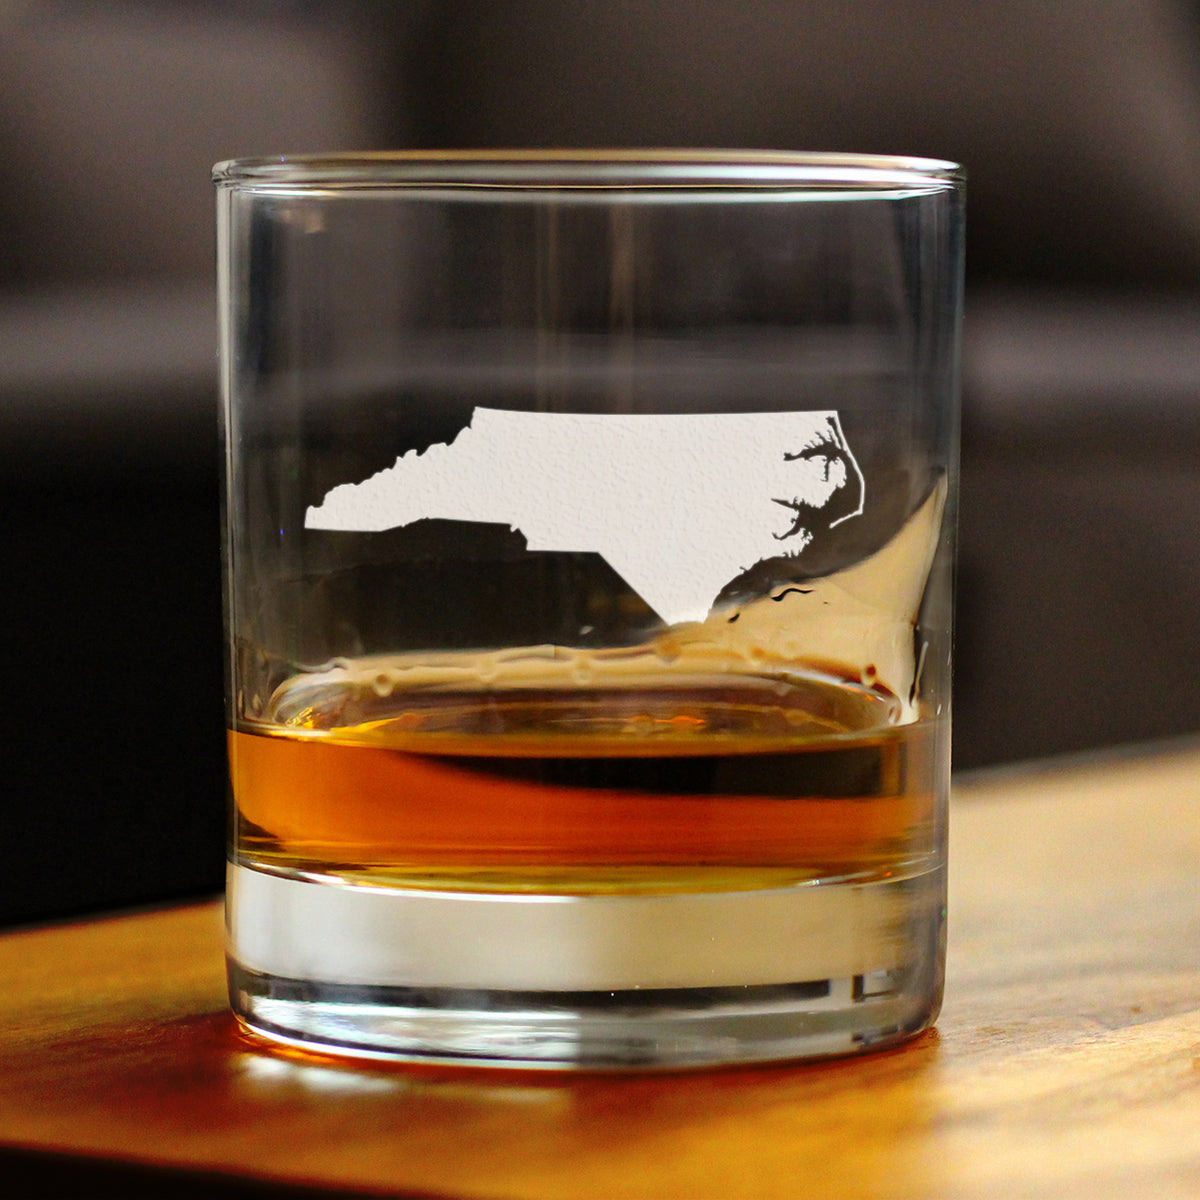 North Carolina State Outline Whiskey Rocks Glass - State Themed Drinking Decor and Gifts for North Carolinian Women &amp; Men - 10.25 Oz Whisky Tumbler Glasses